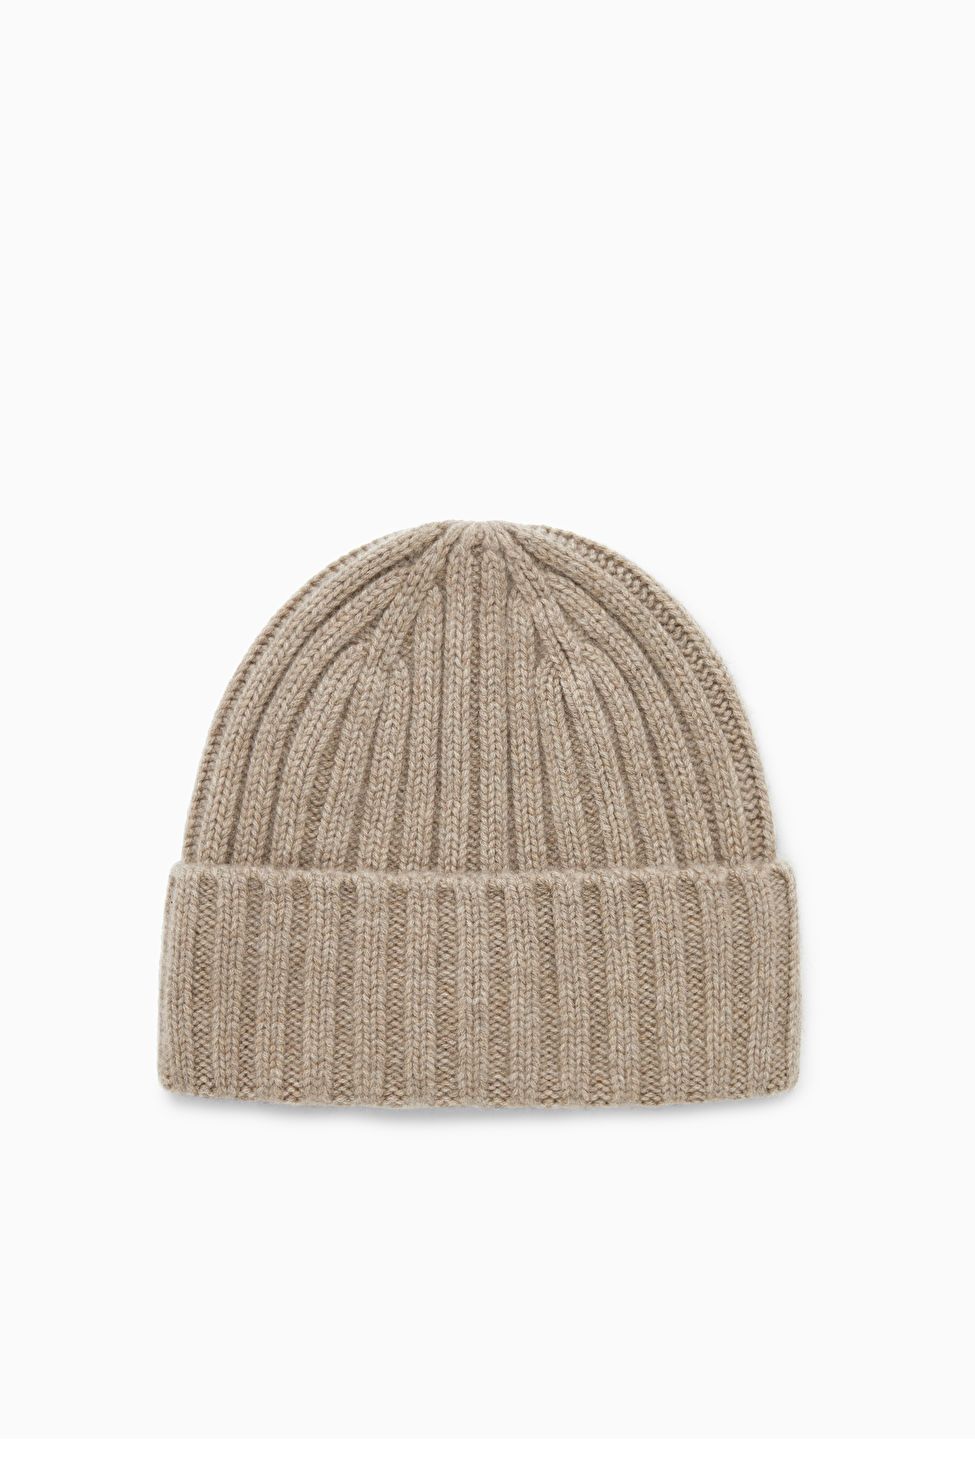 CHUNKY PURE CASHMERE BEANIE - BEIGE - Cashmere - COS | COS (US)